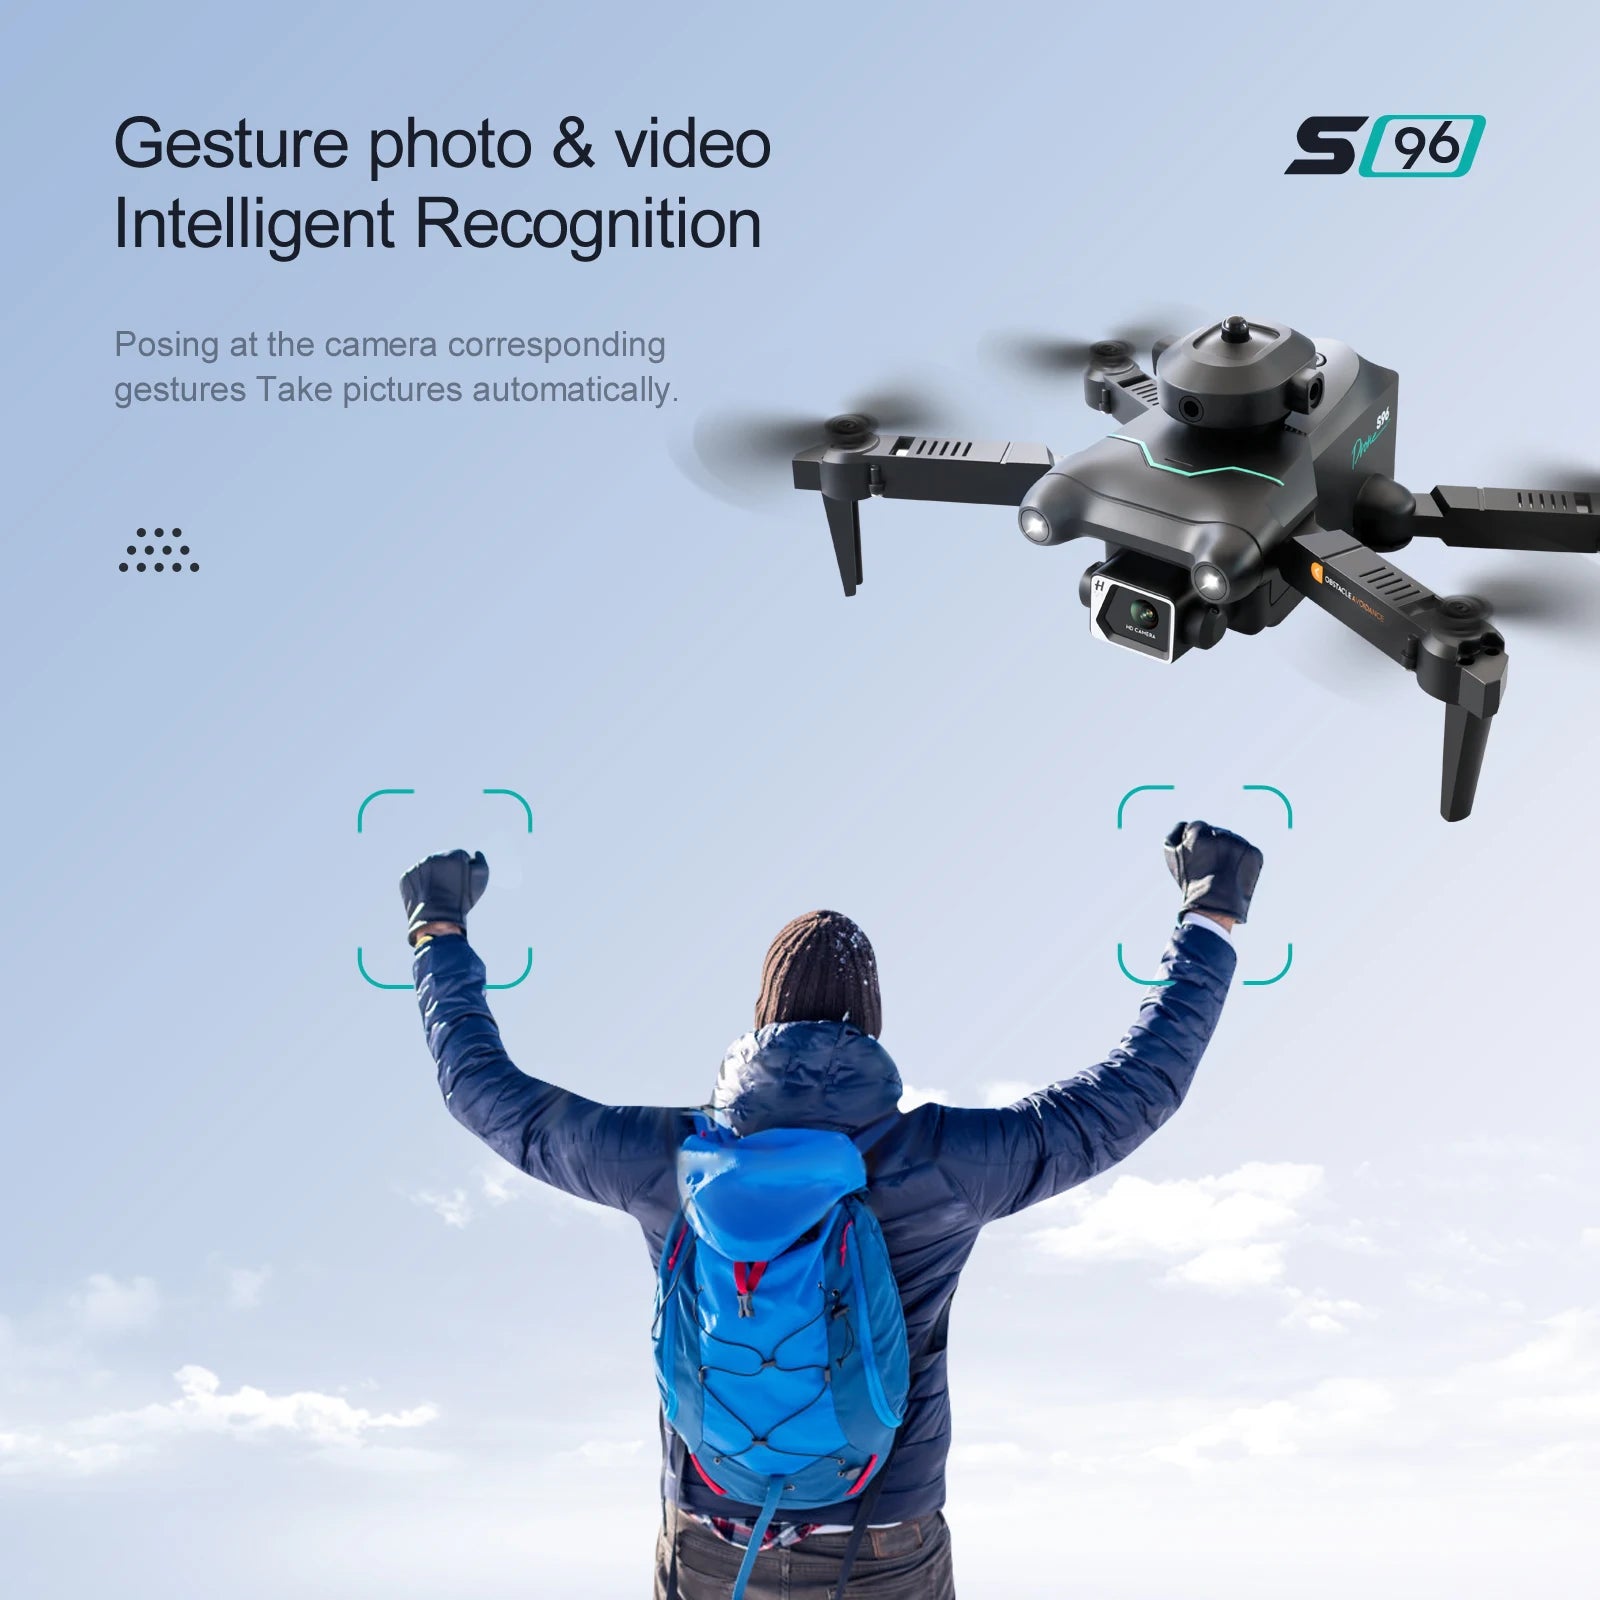 S96 Mini Drone, gesture photo & video 5 96 intelligent recognition posing at